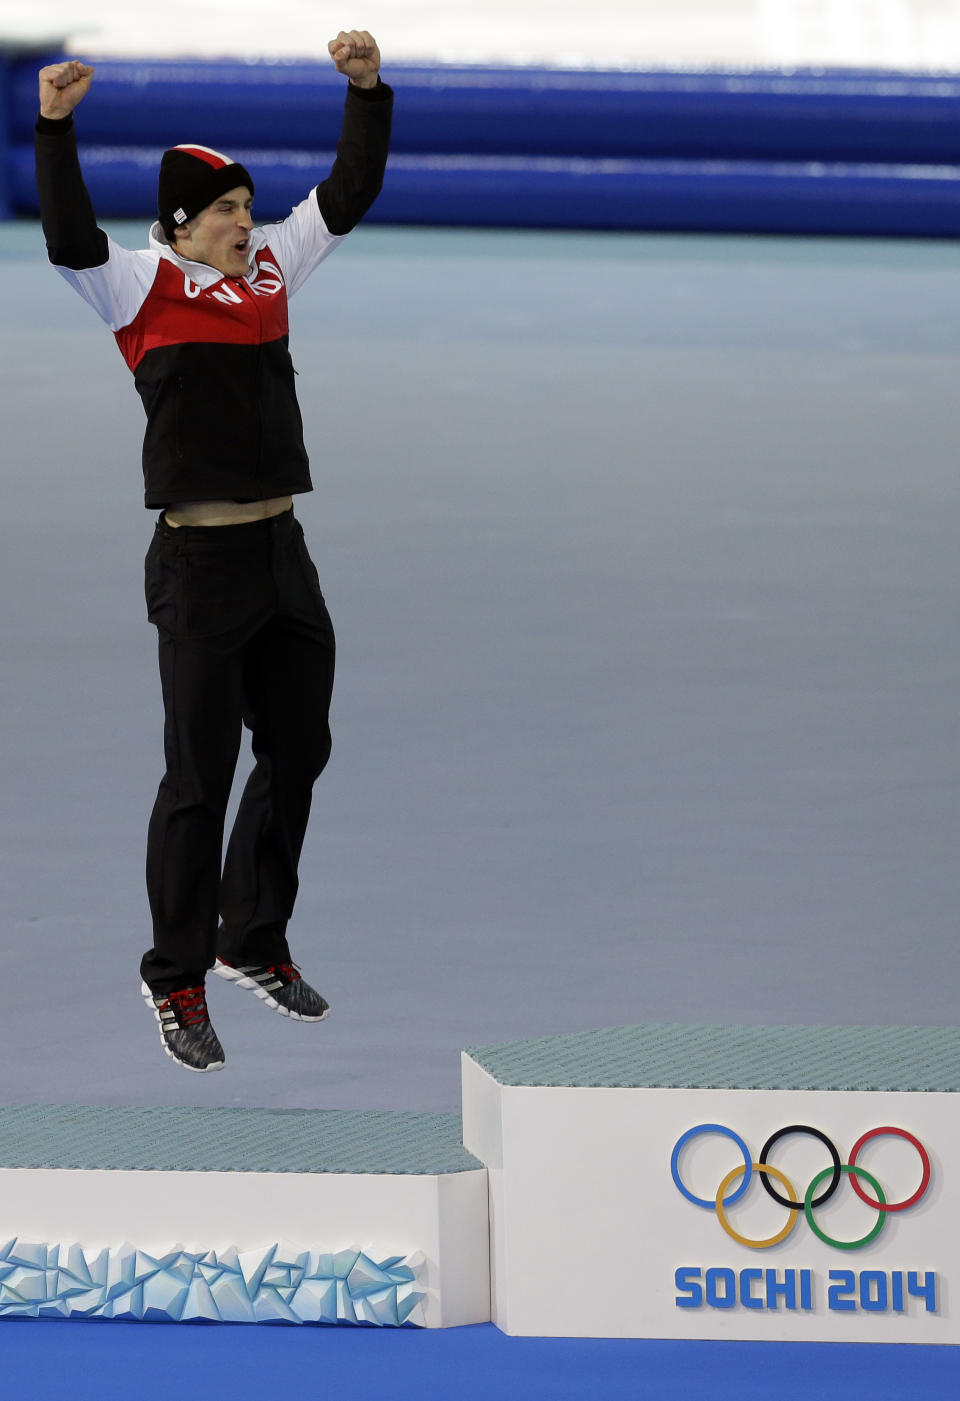 Silver medallist Canada's Denny Morrison jumps in celebration during the flower ceremony for the men's 1000-meter speedskating race at the Adler Arena Skating Center during the 2014 Winter Olympics in Sochi, Russia, Wednesday, Feb. 12, 2014. (AP Photo/Patrick Semansky)